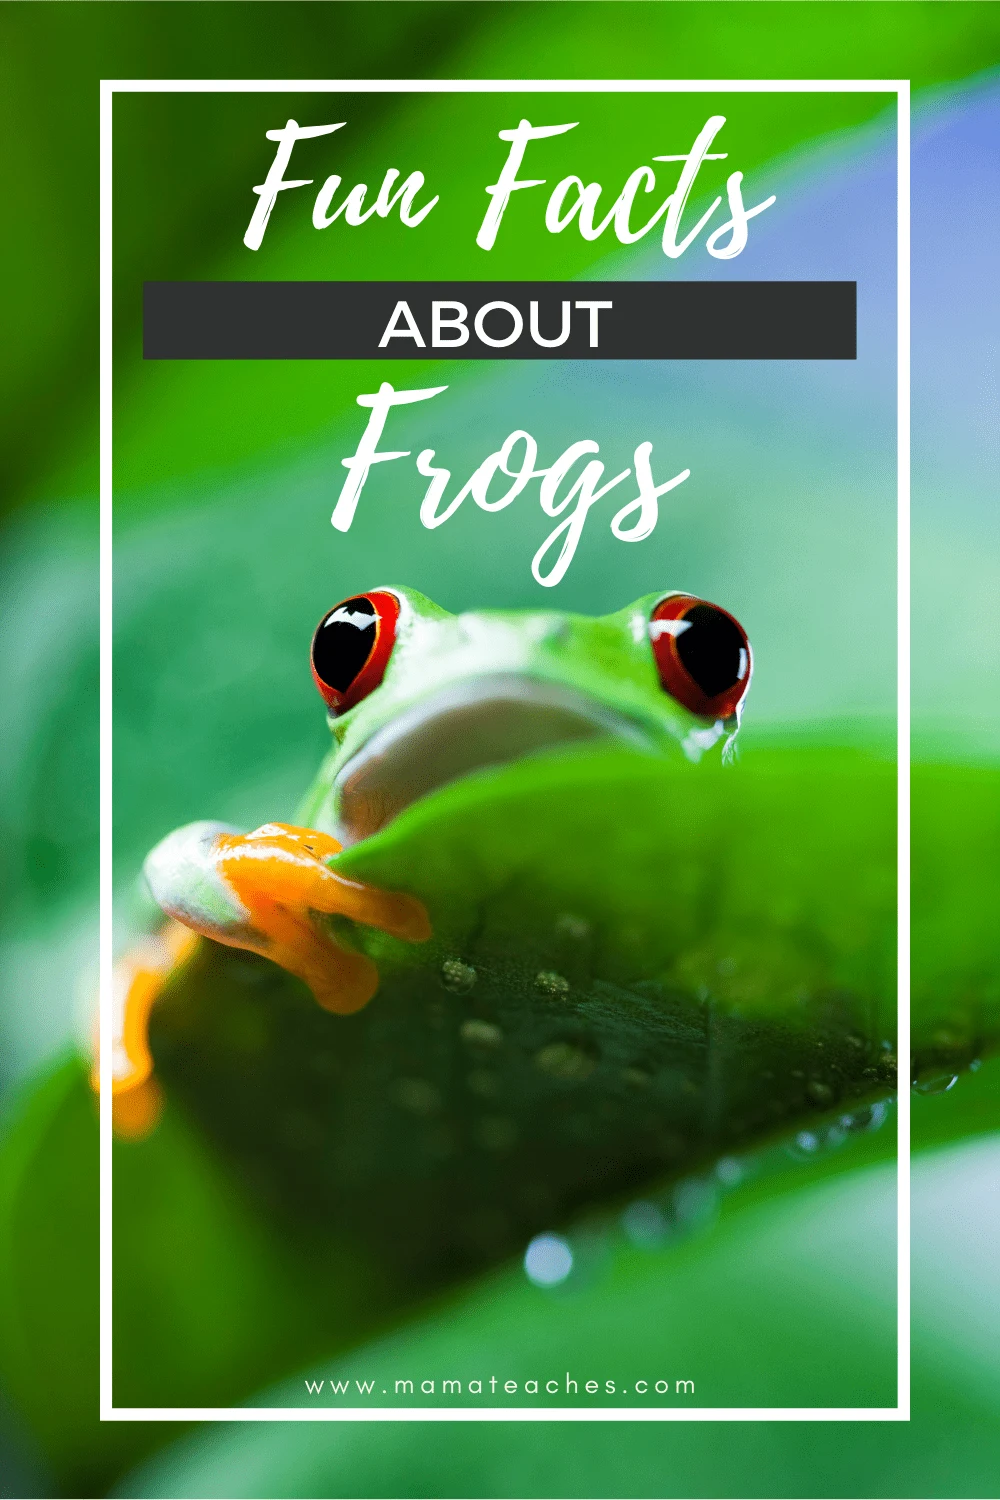 Fun Facts About Frogs